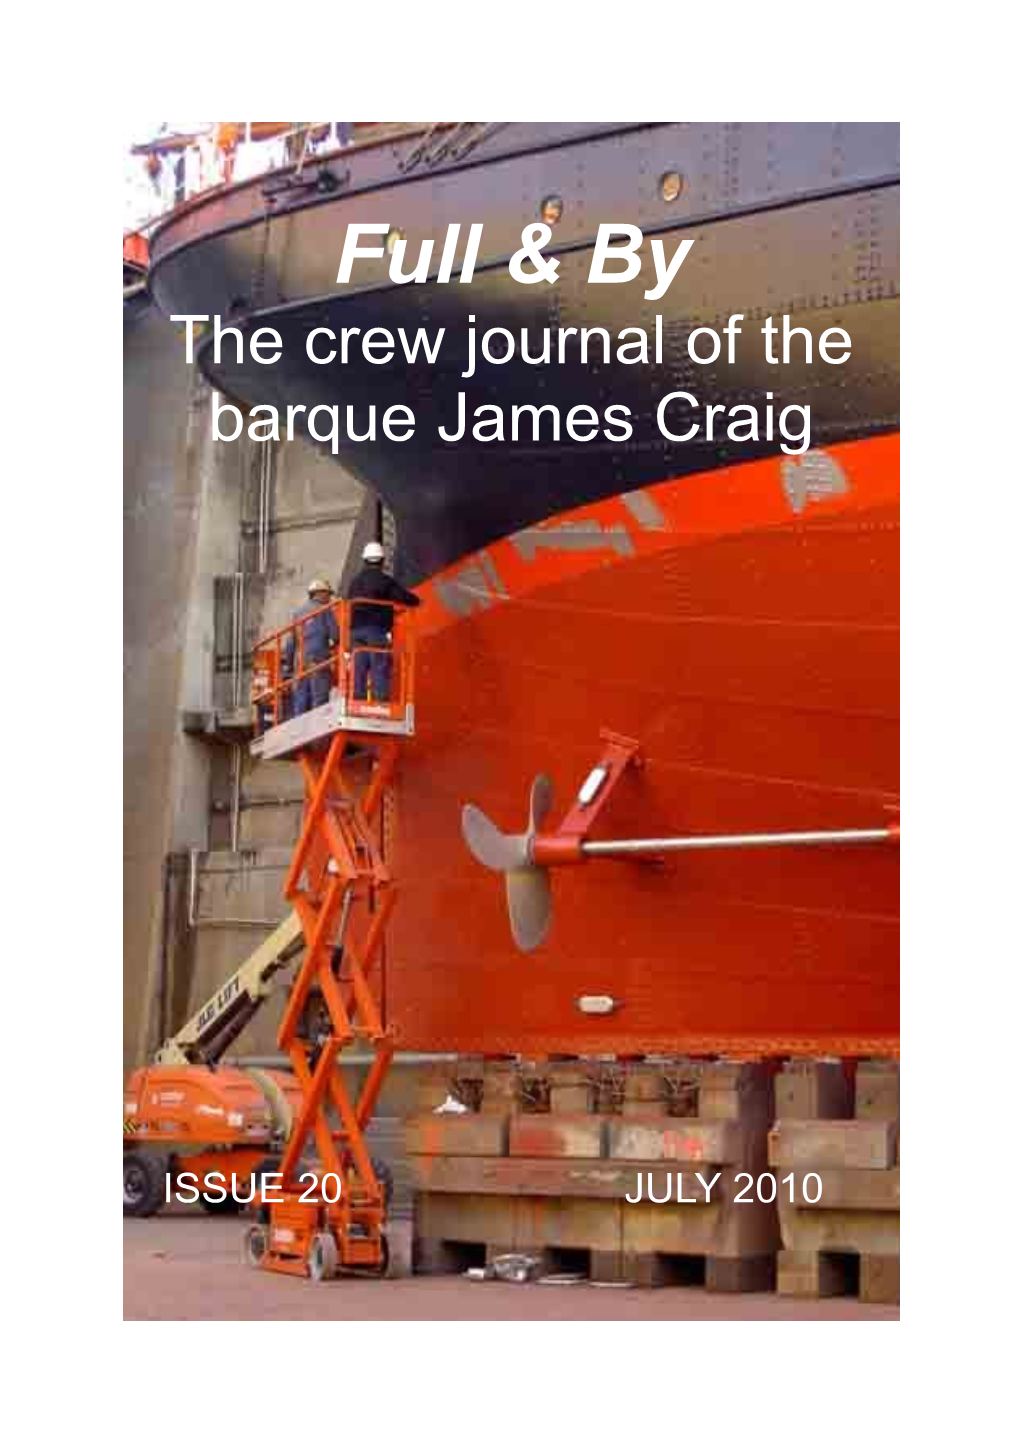 The Crew Journal of the Barque James Craig